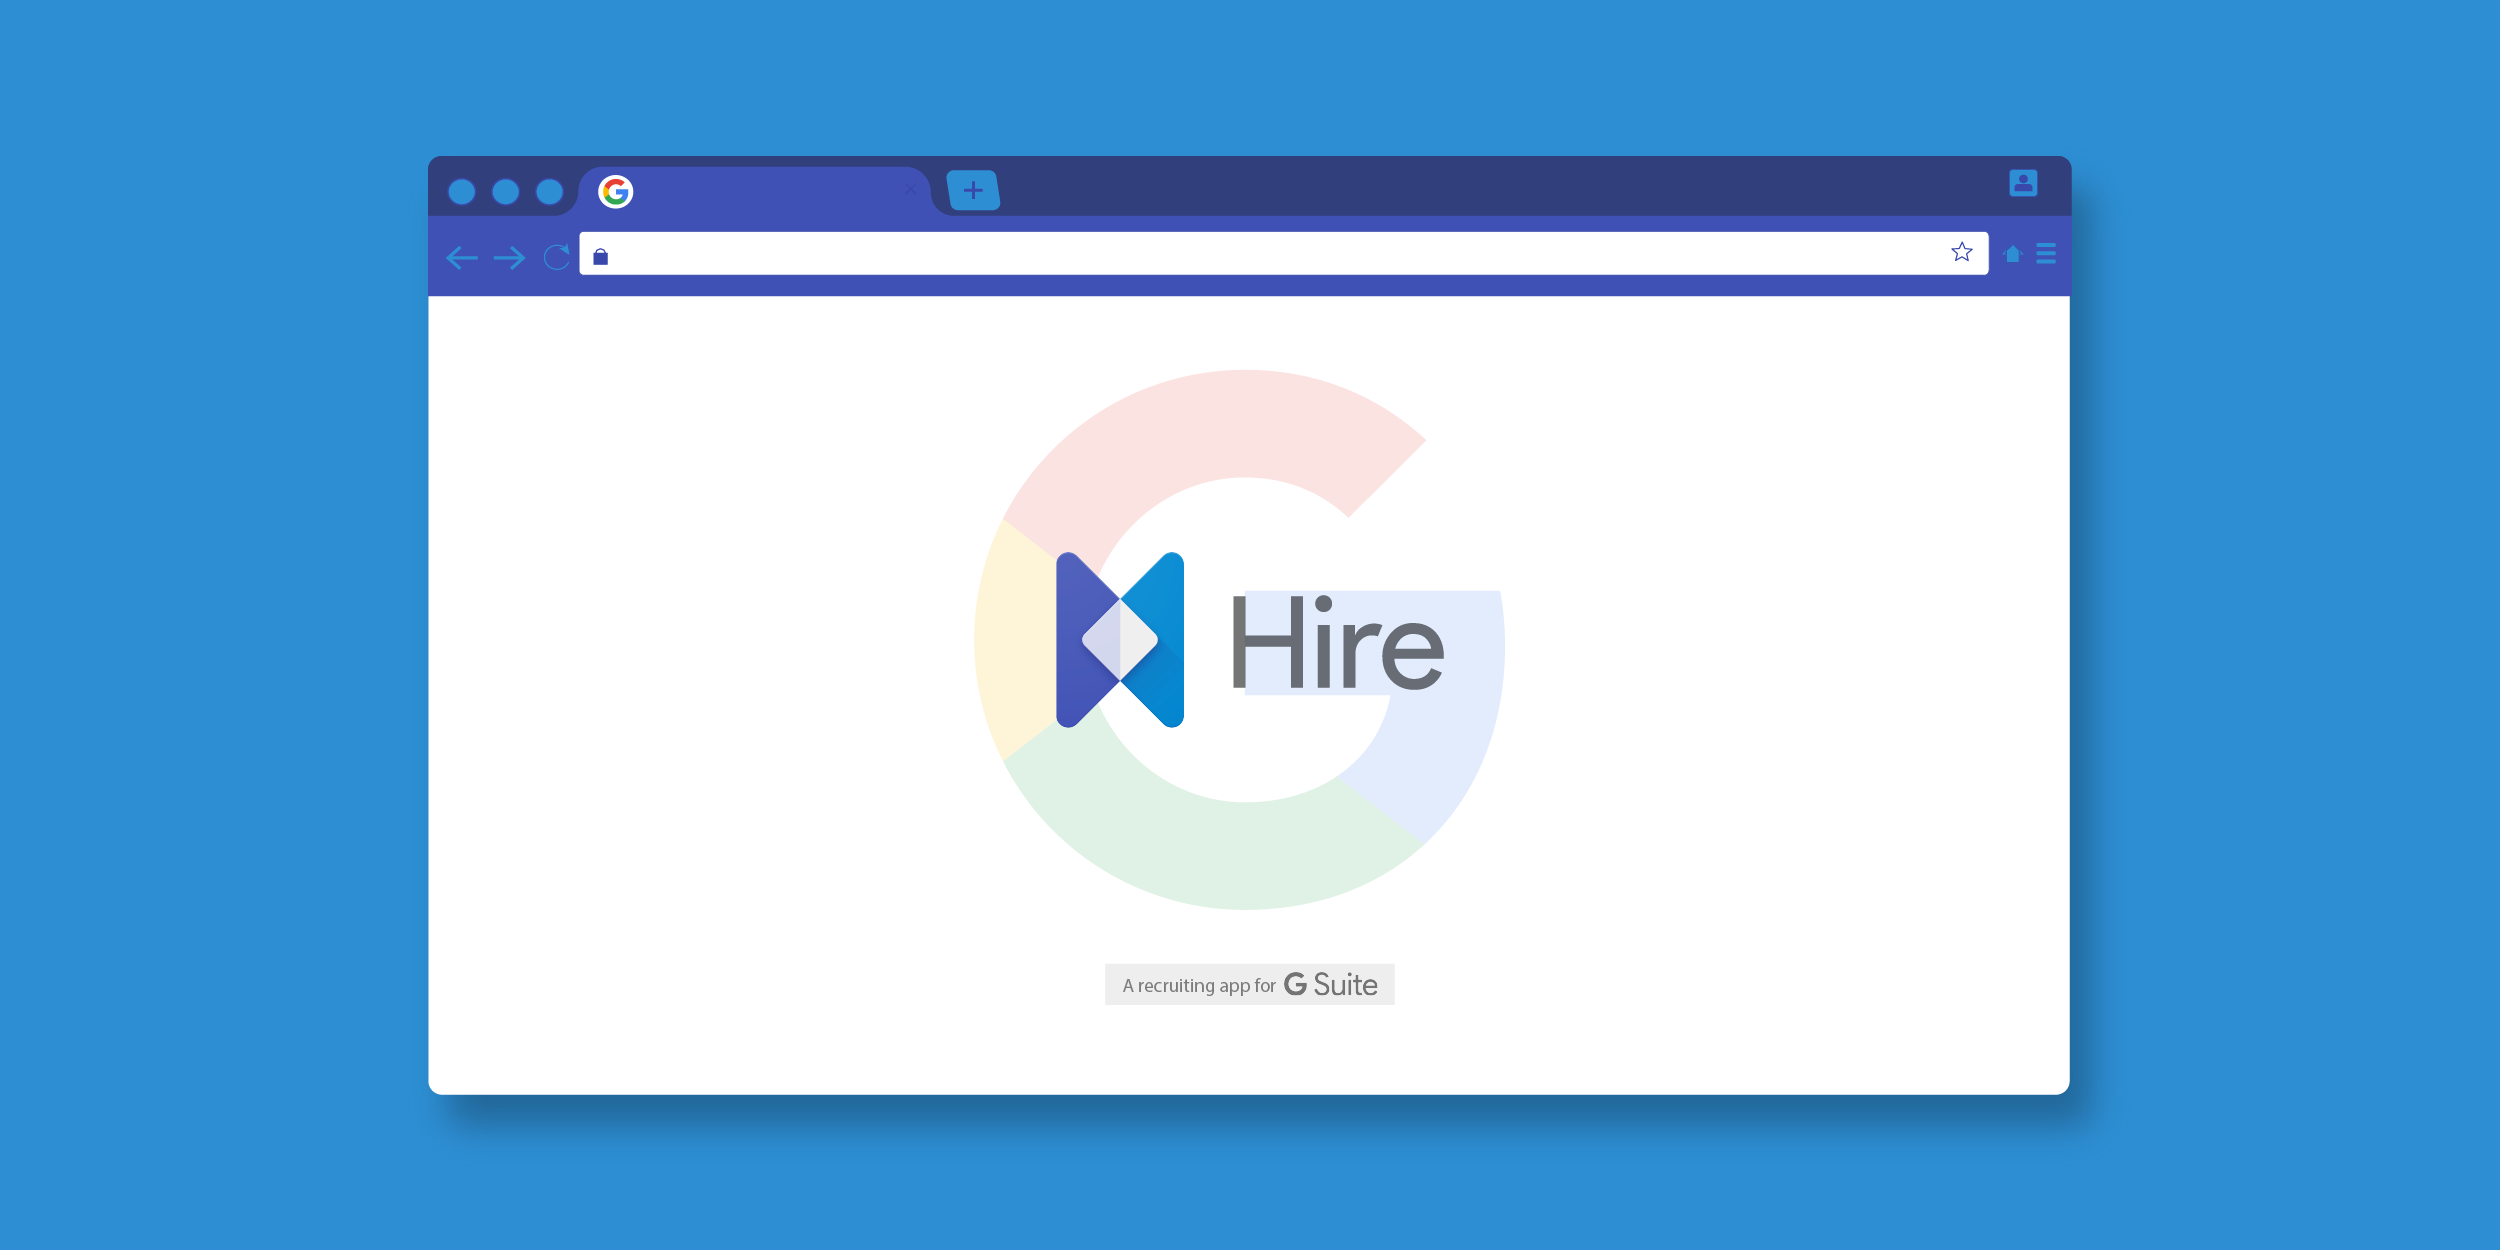 Hire by Google Shutting Down: When, Why, and What's Next